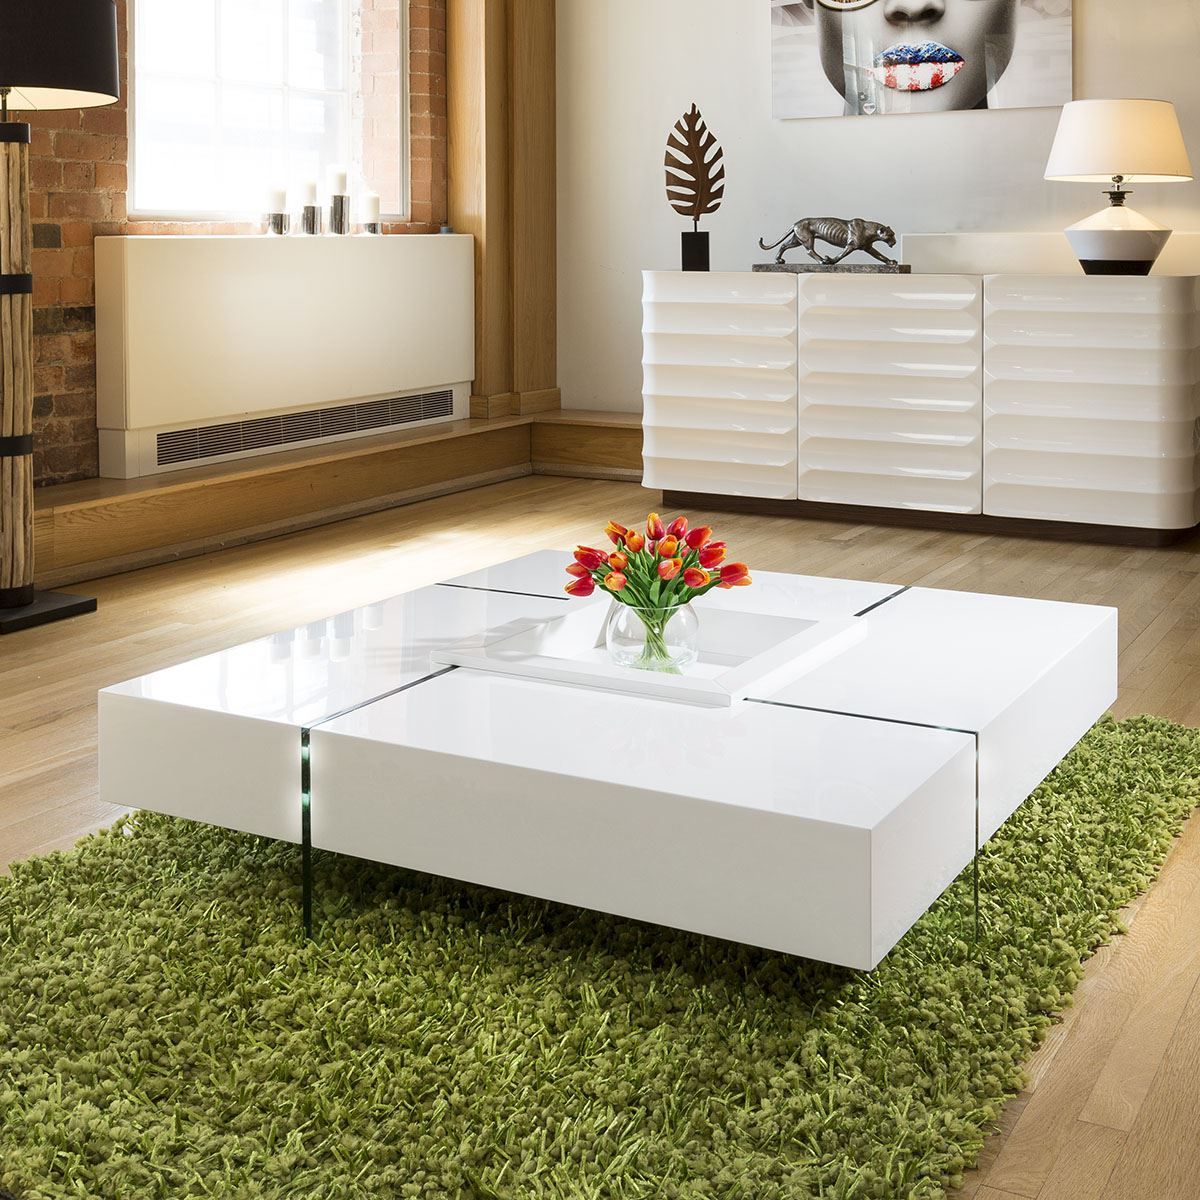 Quatropi Modern Large White Gloss Coffee Table 1194mm For Popular White Triangular Coffee Tables (View 18 of 20)